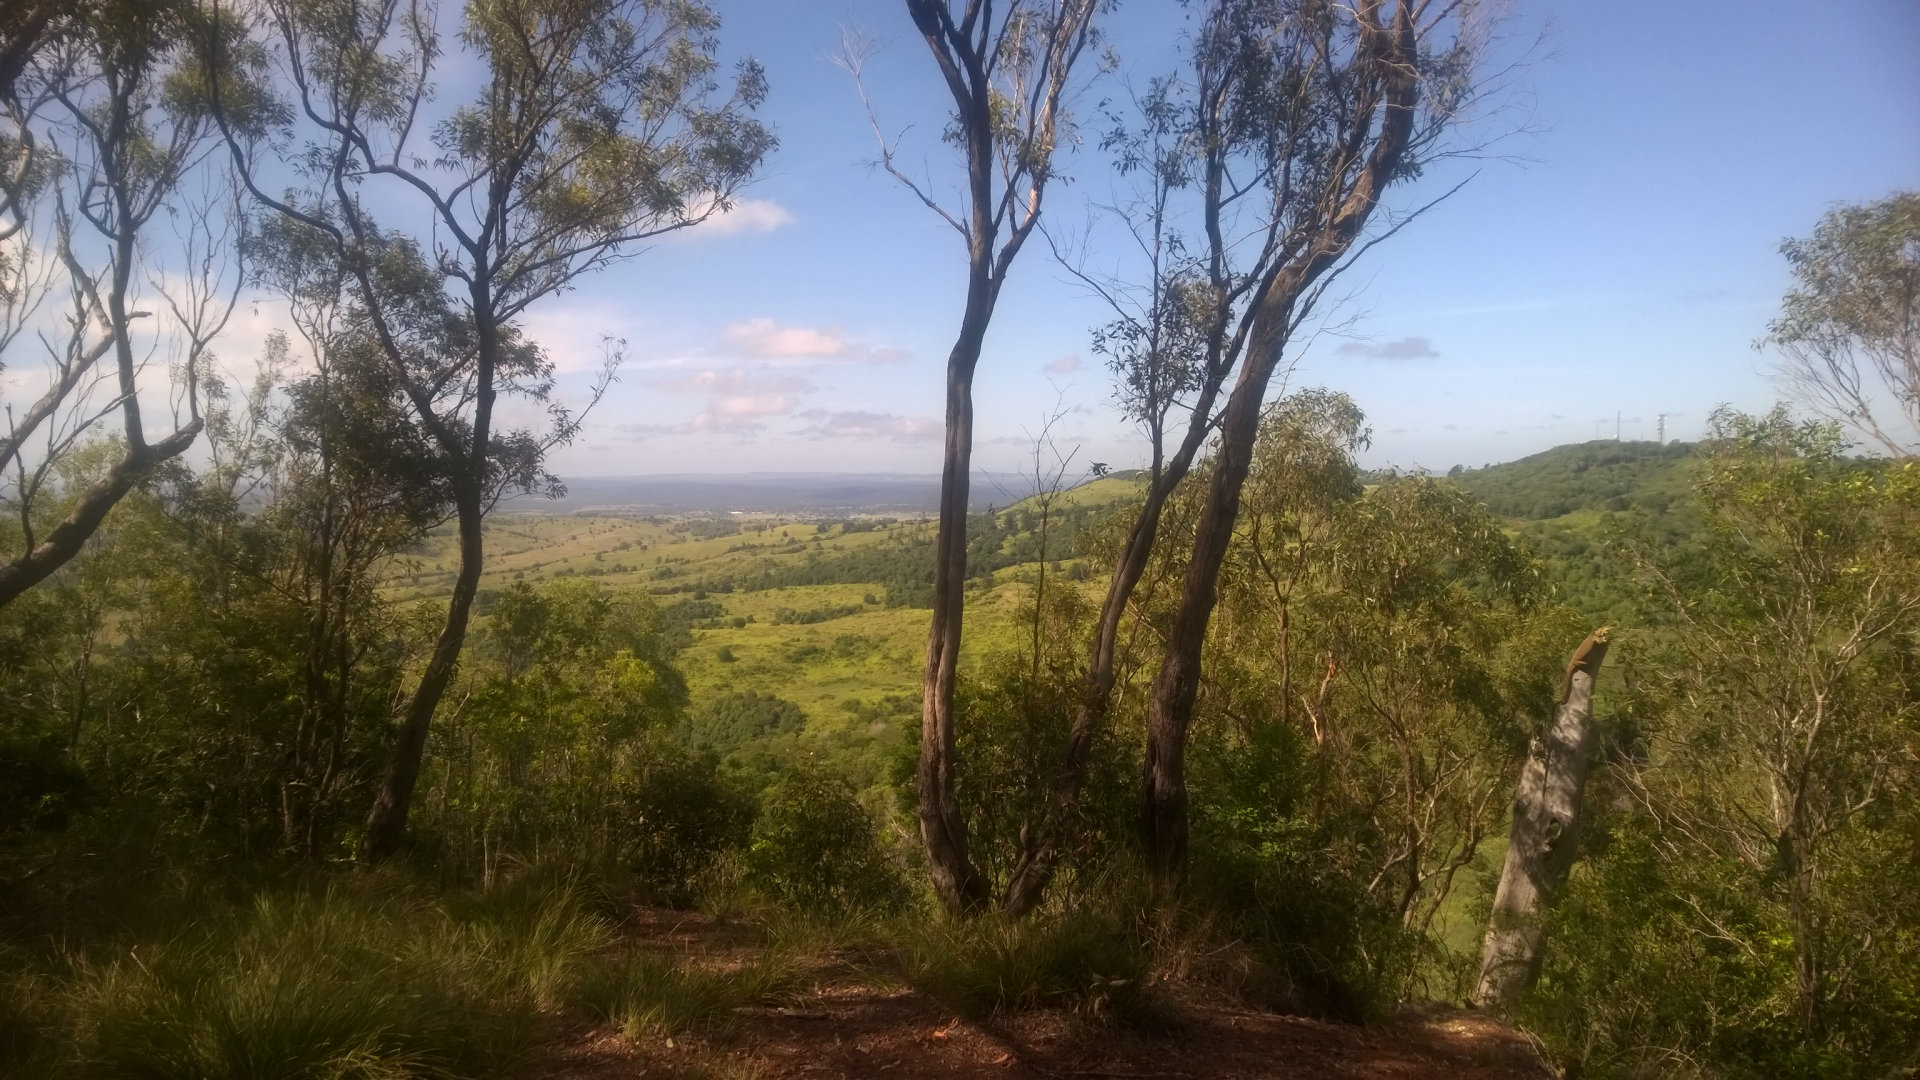 Looking south from Braithwaite's Lookout at Boat Mountain Conservation Park, and a goanna perched at the top of a dead tree trunch. Boat Mountain is west of Goomeri and north of Murgon, with Braithwaite's Lookout, Daniel's Lookout, and Silburn Vine Scrub walks